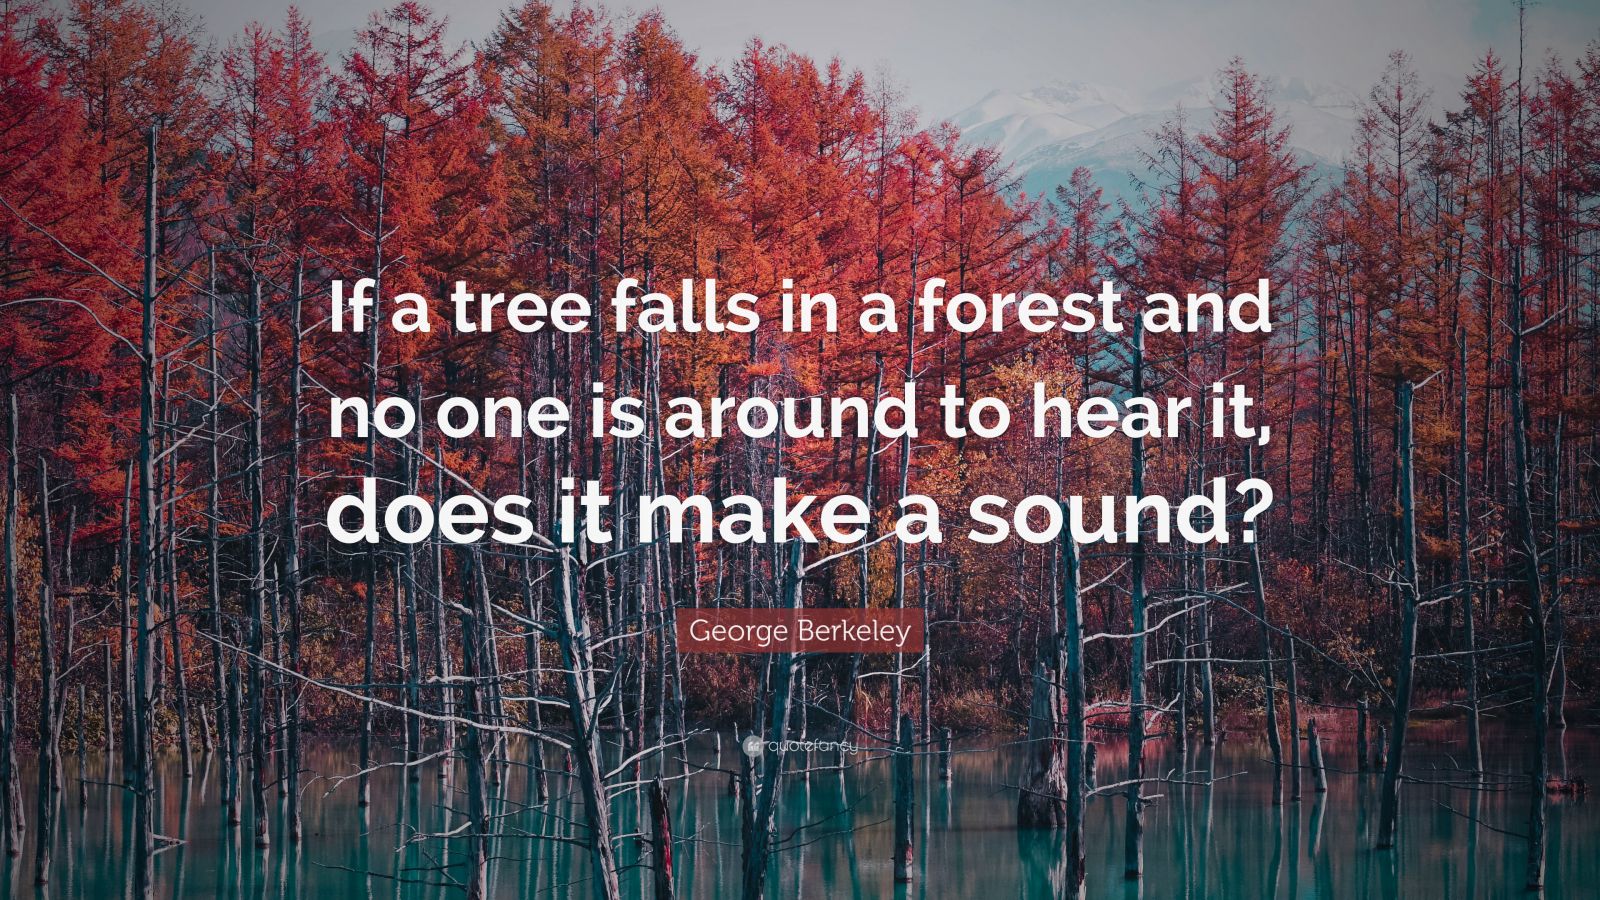 George Berkeley Quote: “If a tree falls in a forest and no one is